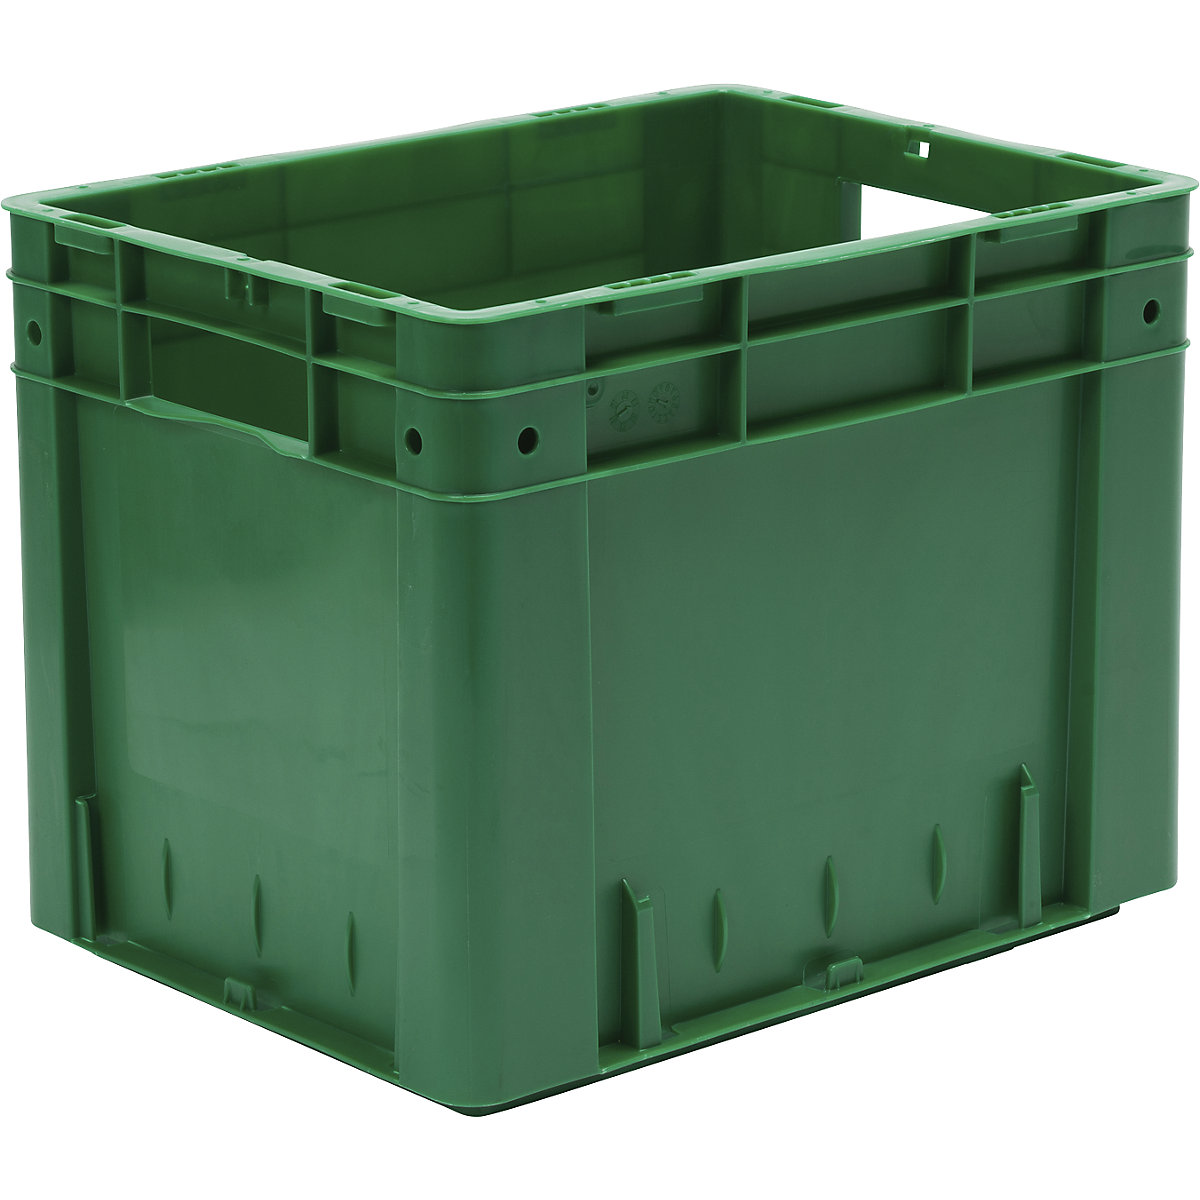 Euro stacking container, capacity 29 l, LxWxH 400 x 300 x 320 mm, pack of 4, green-5